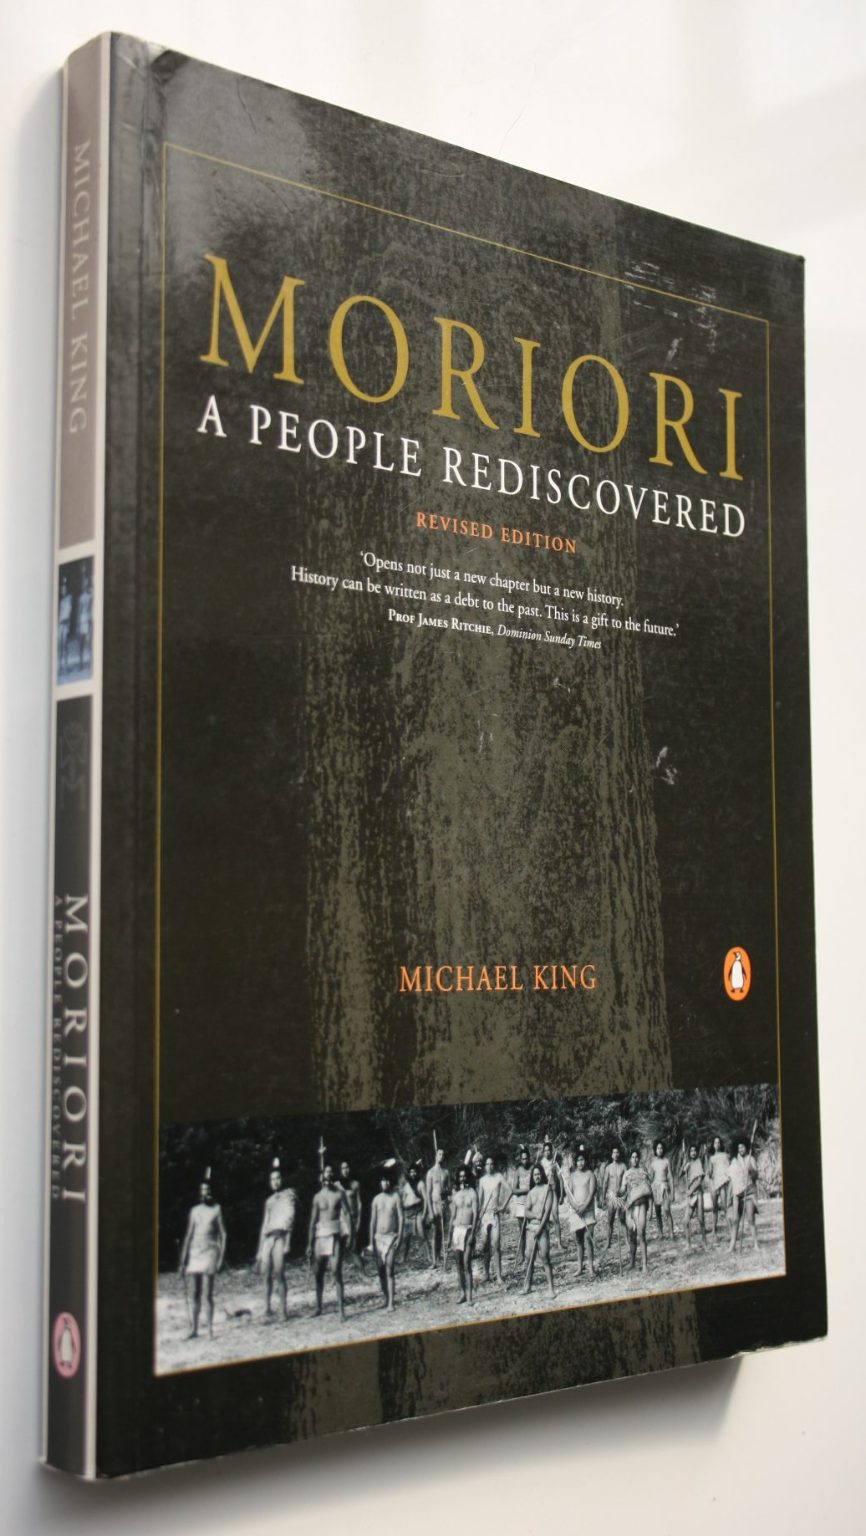 Moriori: A People Rediscovered. by Michael King. Publisher: Penguin Books (NZ) , 2000, REVISED EDITION.